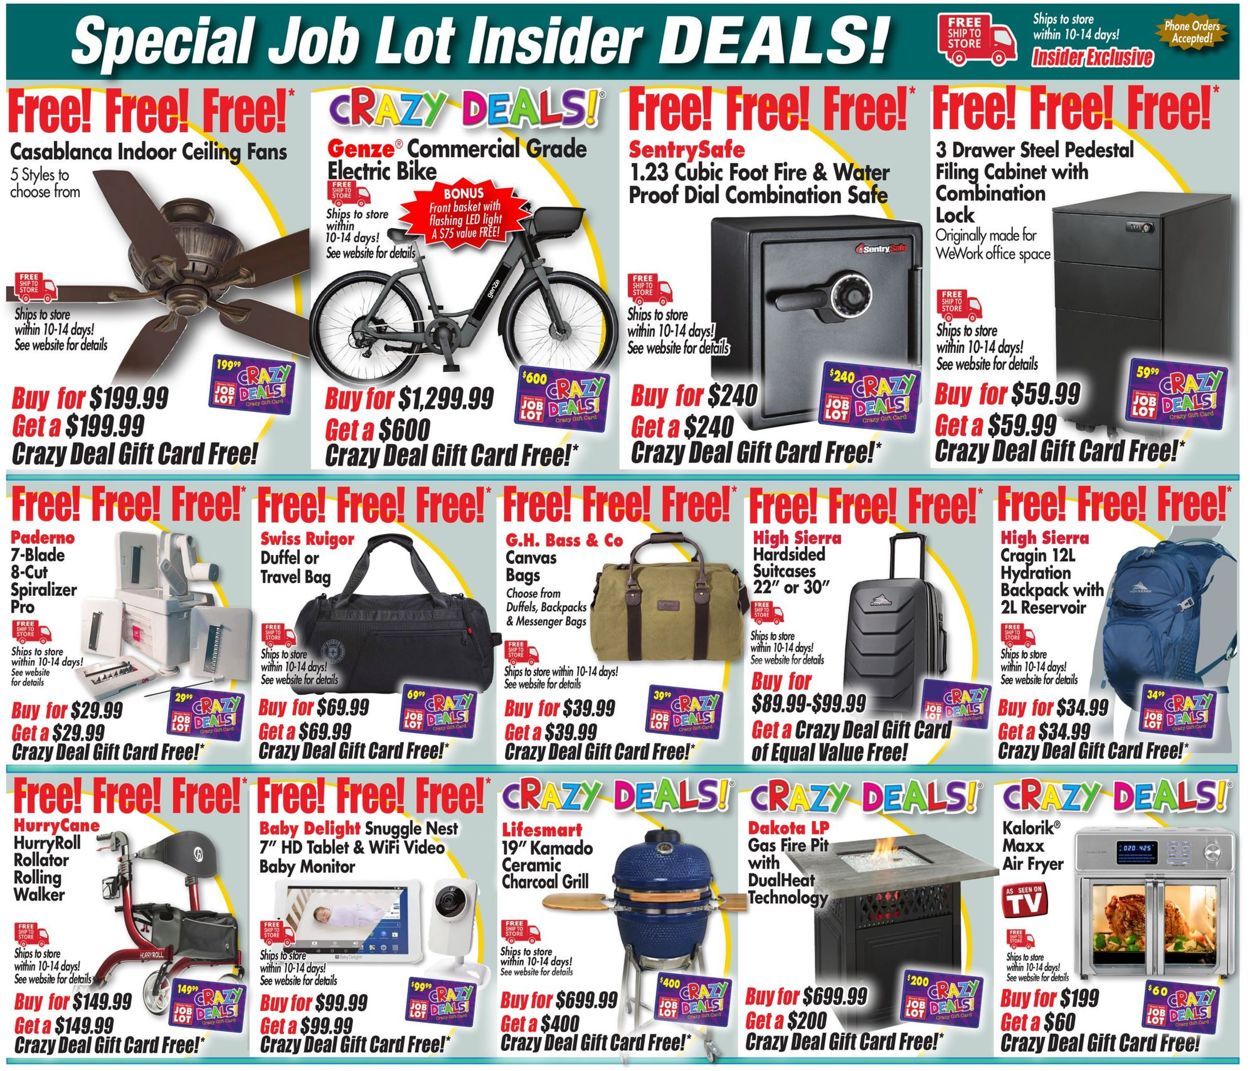 Ocean State Job Lot Ad from 04/22/2021